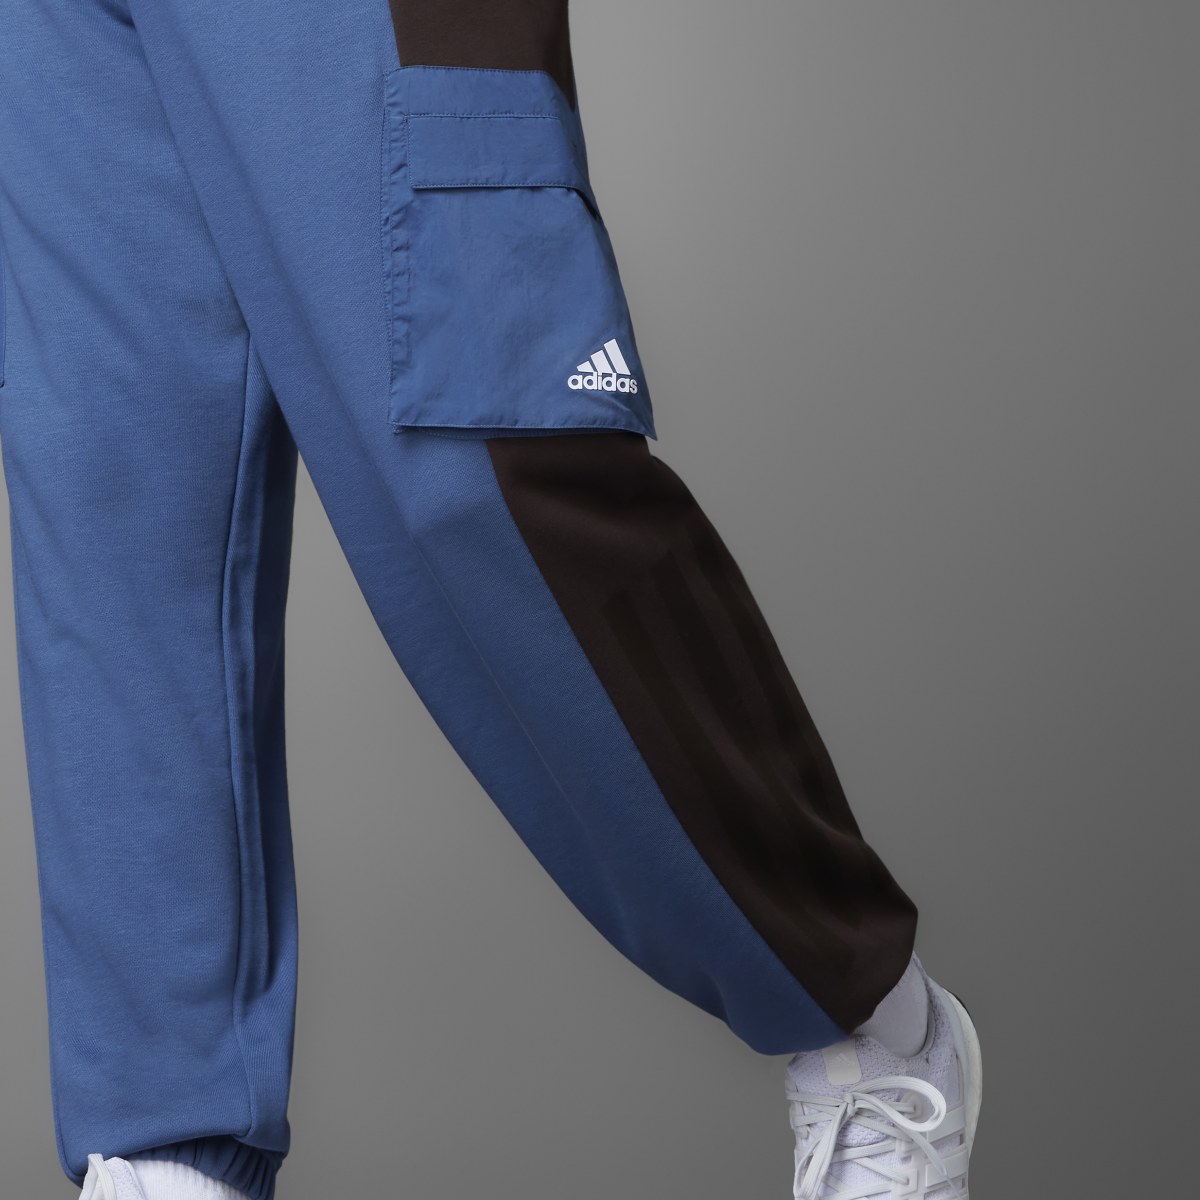 Adidas Colorblock French Terry Joggers. 9